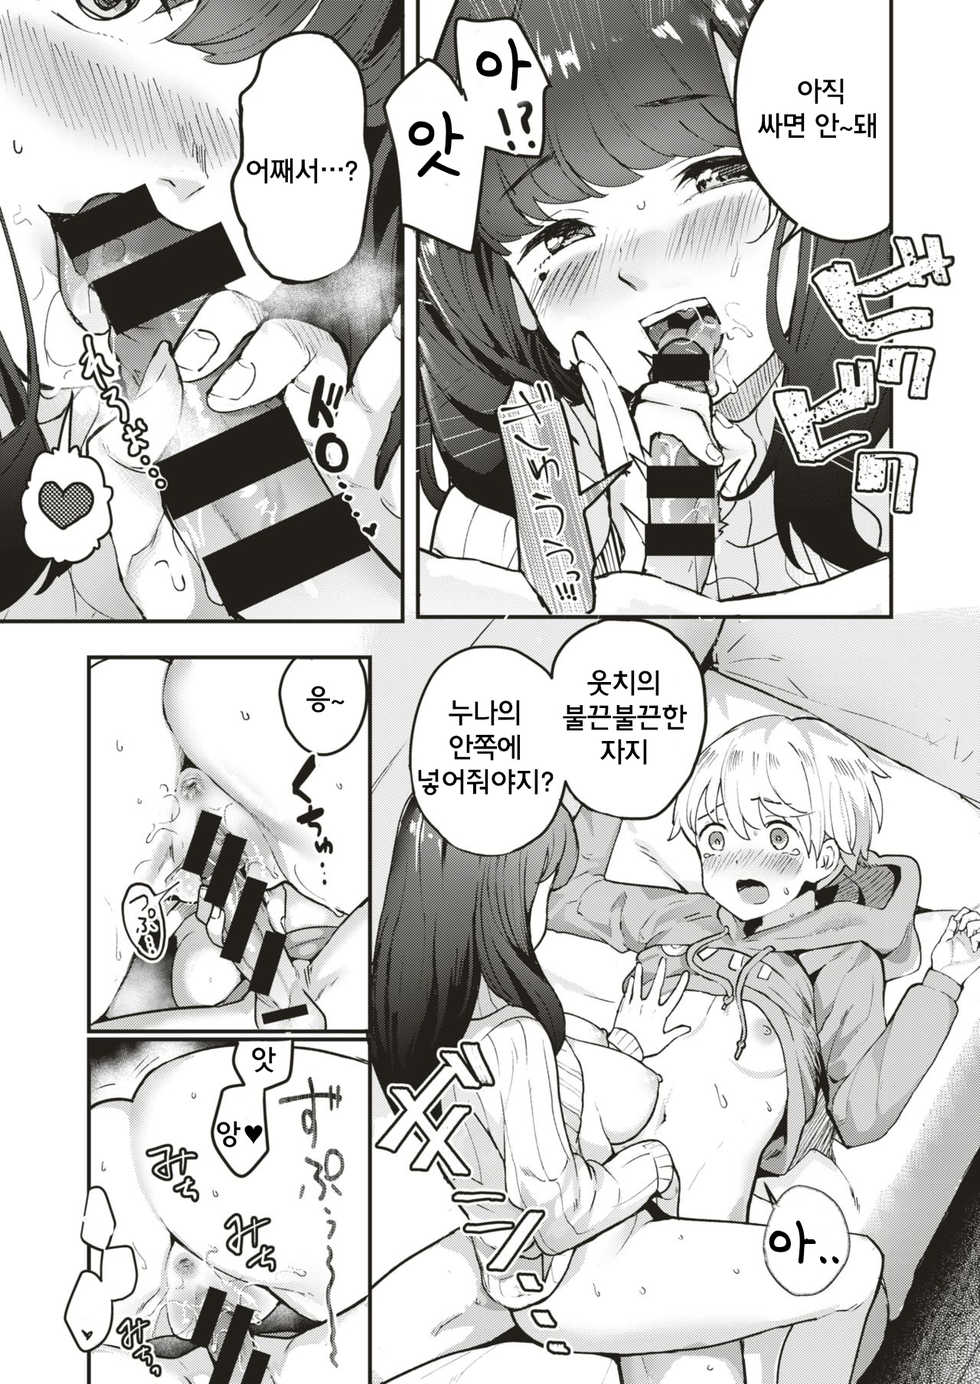 [ababari] Tomodachi no Onee-san - Your sister is fucking special | 친구의 누나 (COMIC X-EROS #79) [Korean] [Digital] - Page 11